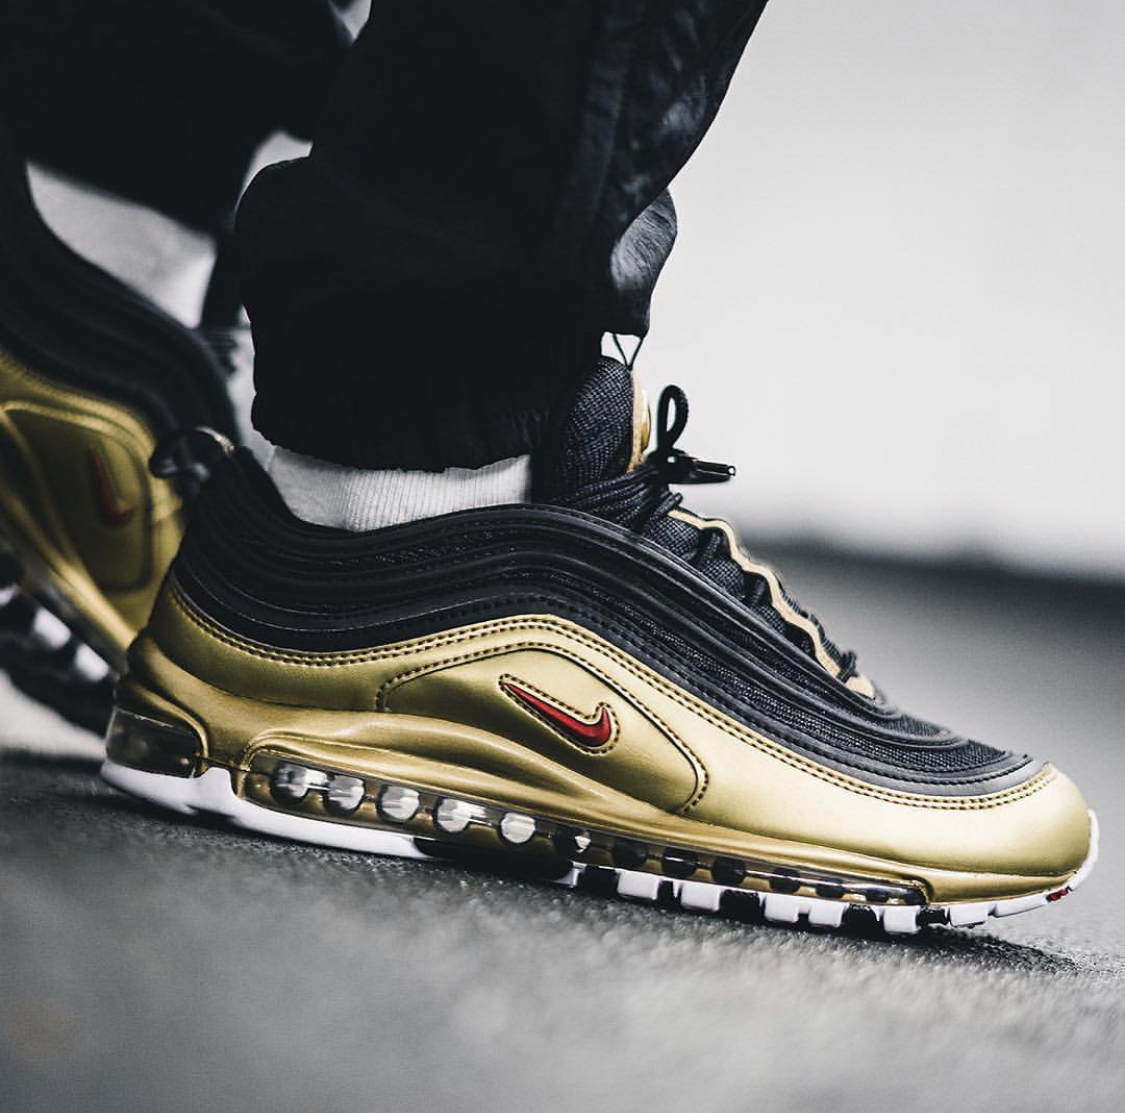 Now Available: Nike Air Max 97 QS 